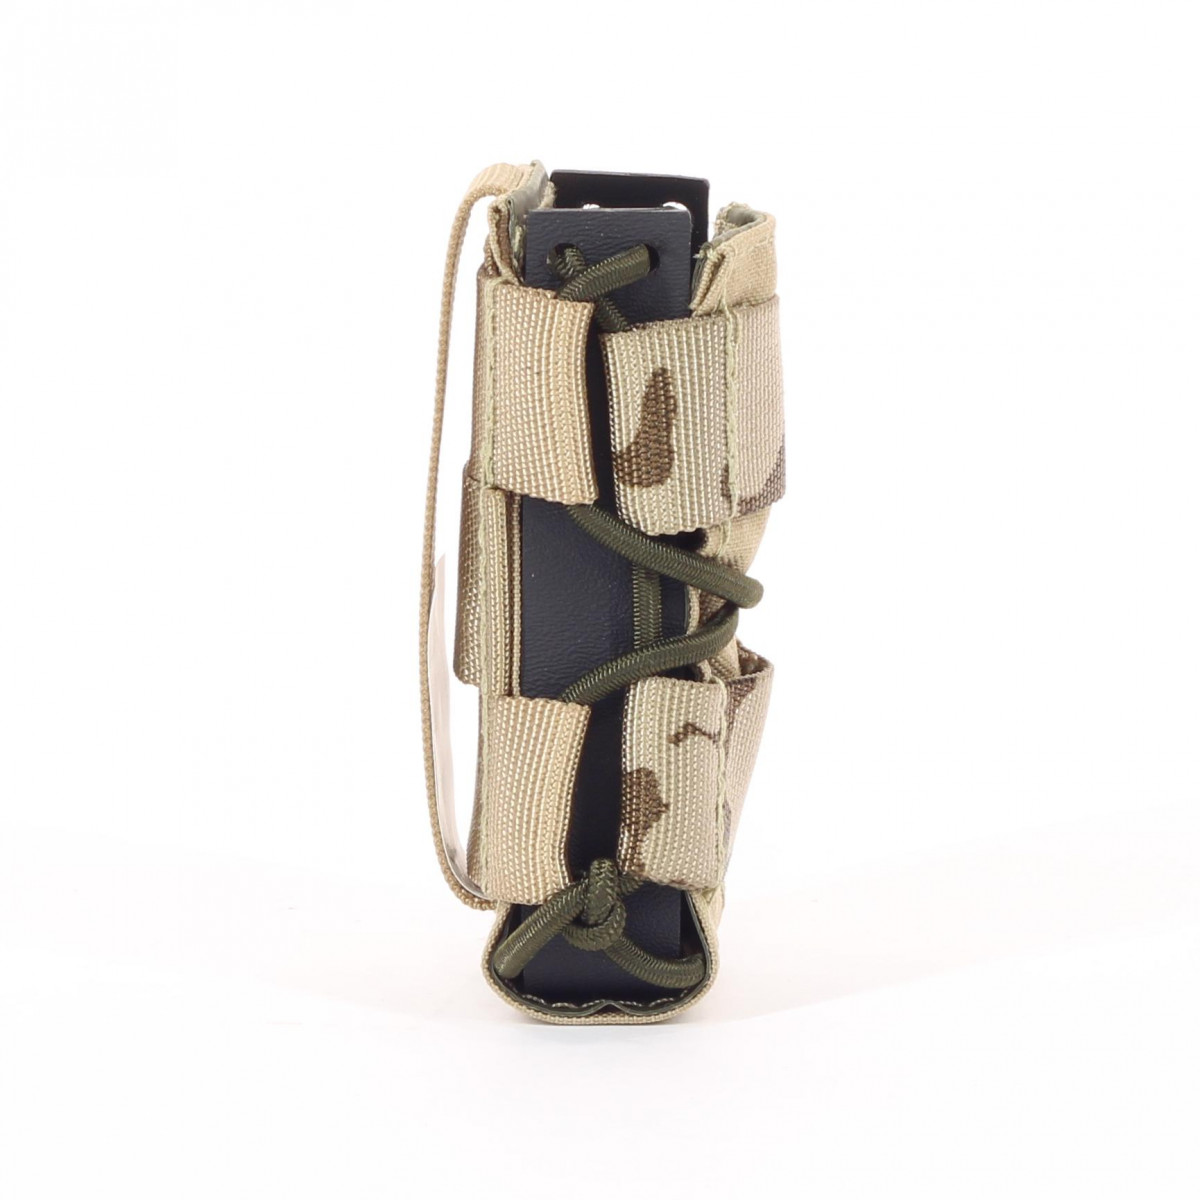 Quick-draw magazine pouch P8 in tropical camouflage